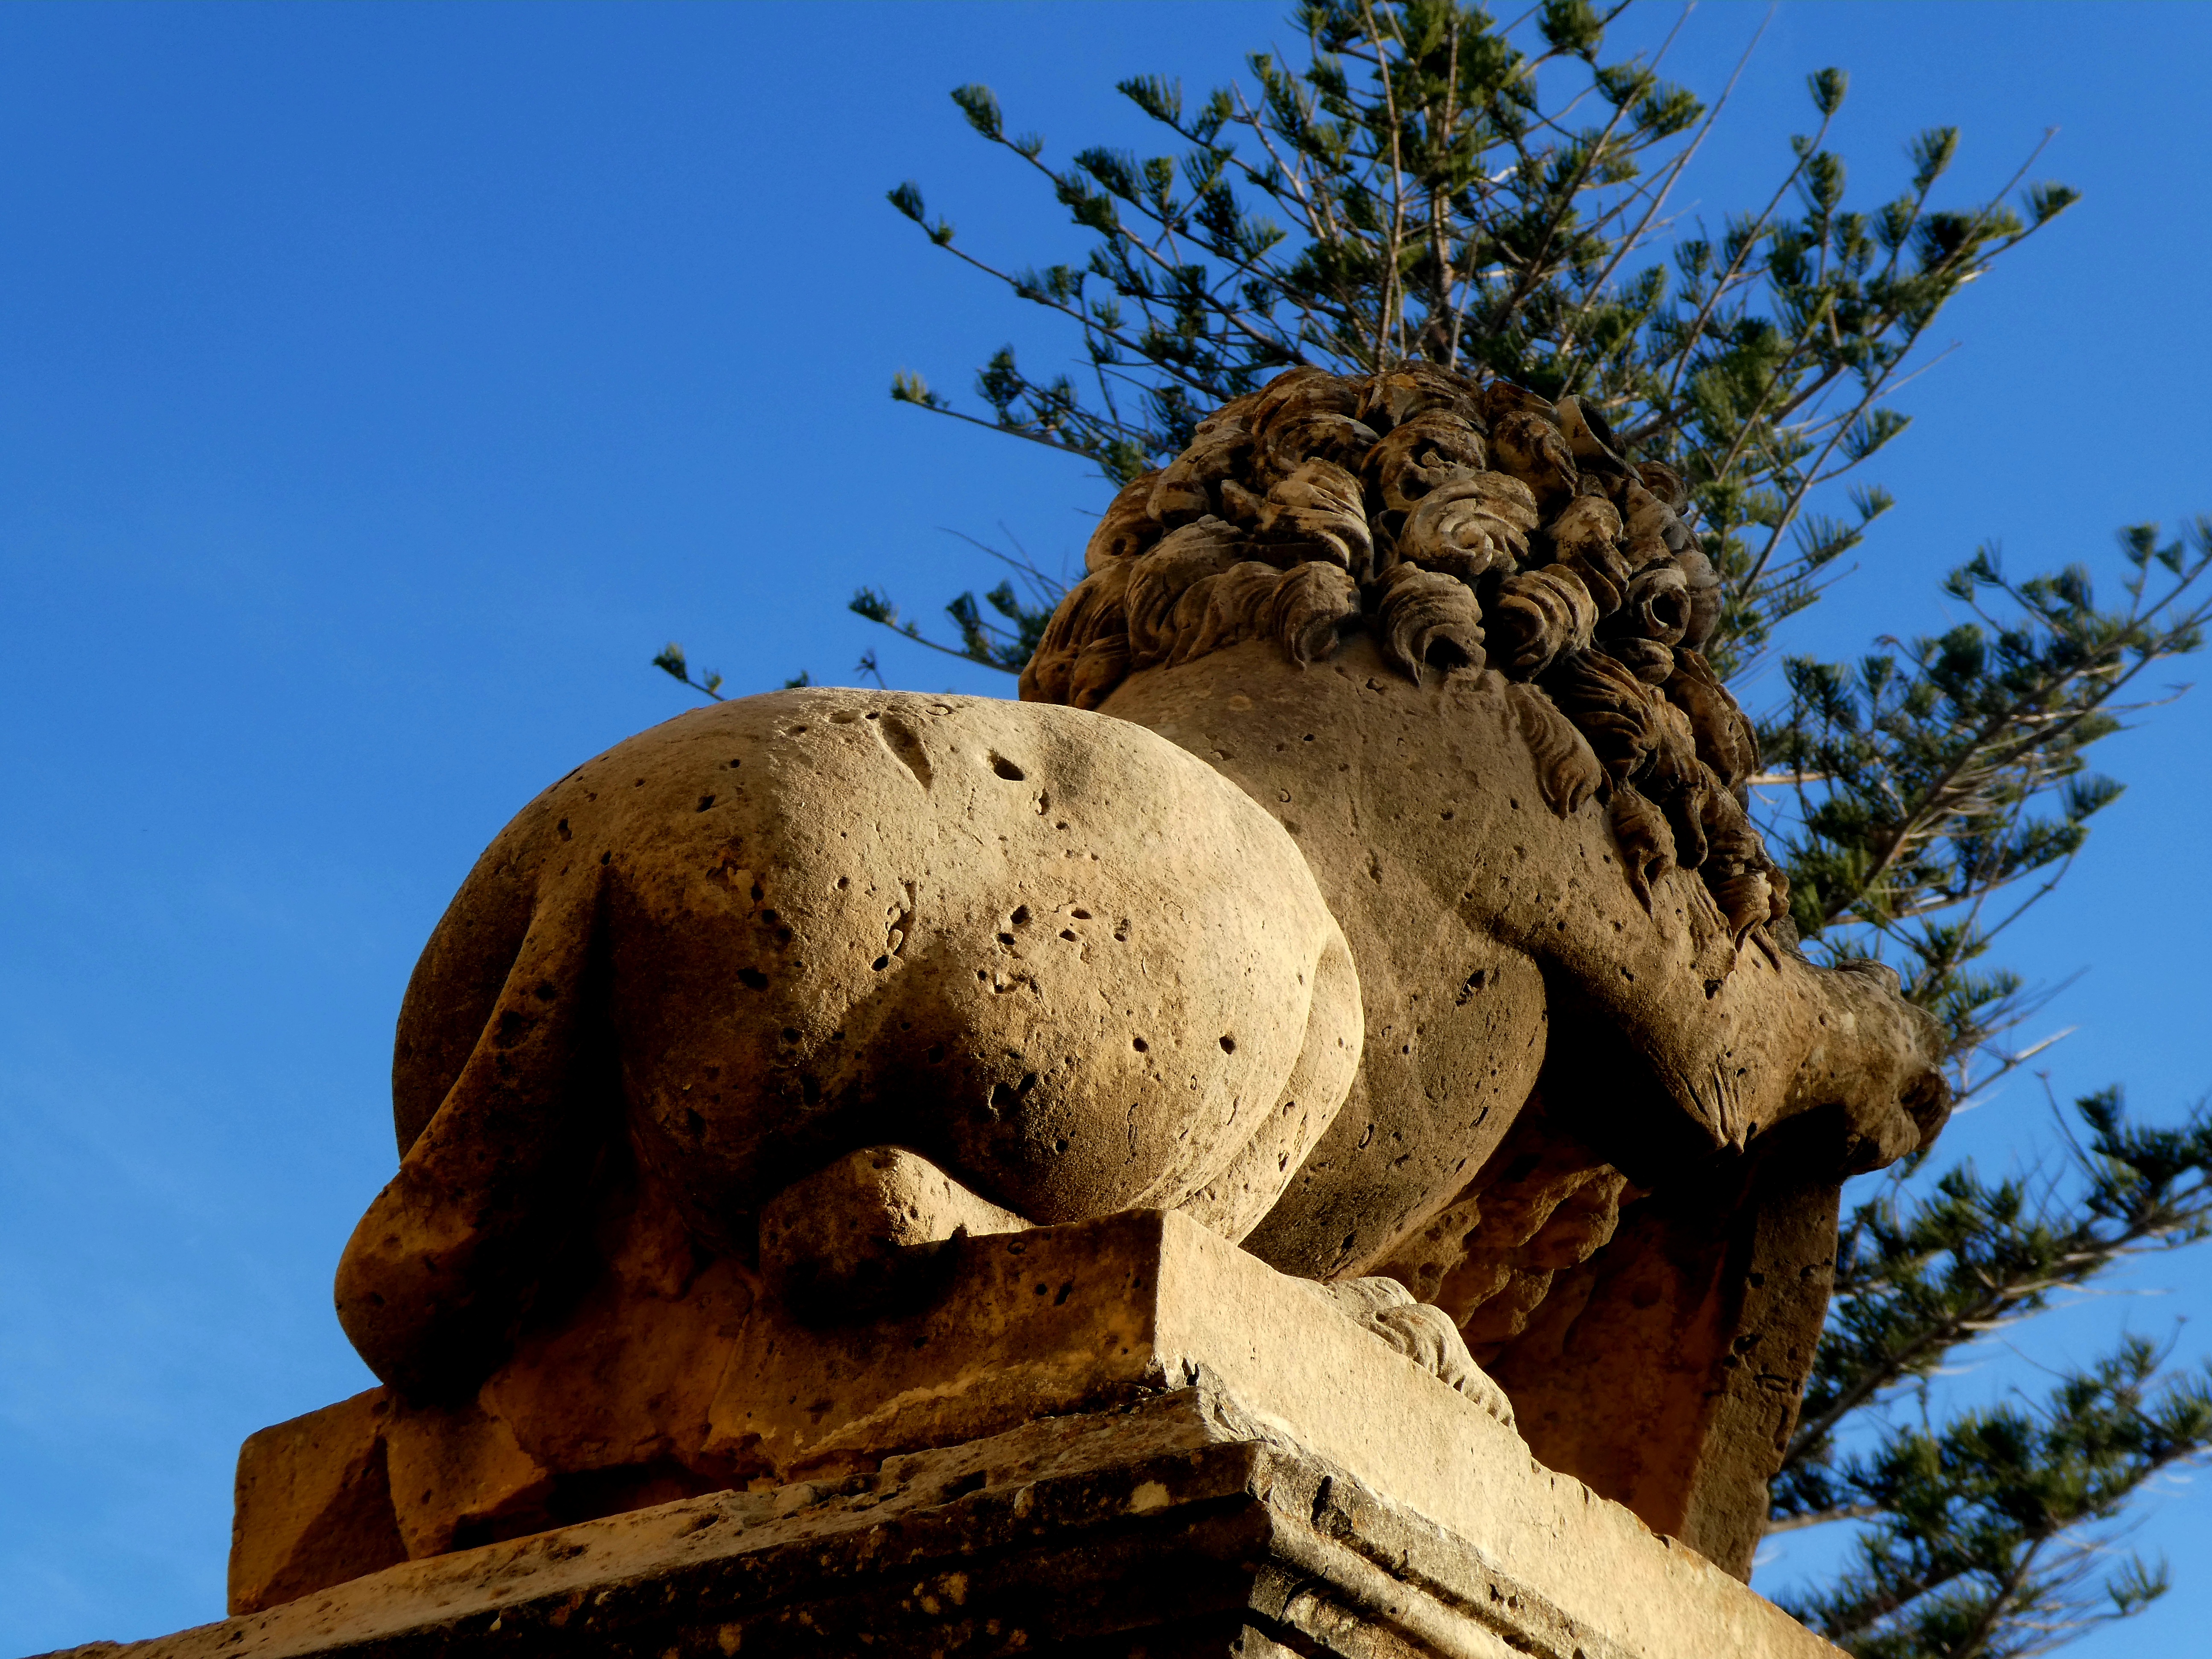 A sculpture of a stone lion from the rear end.